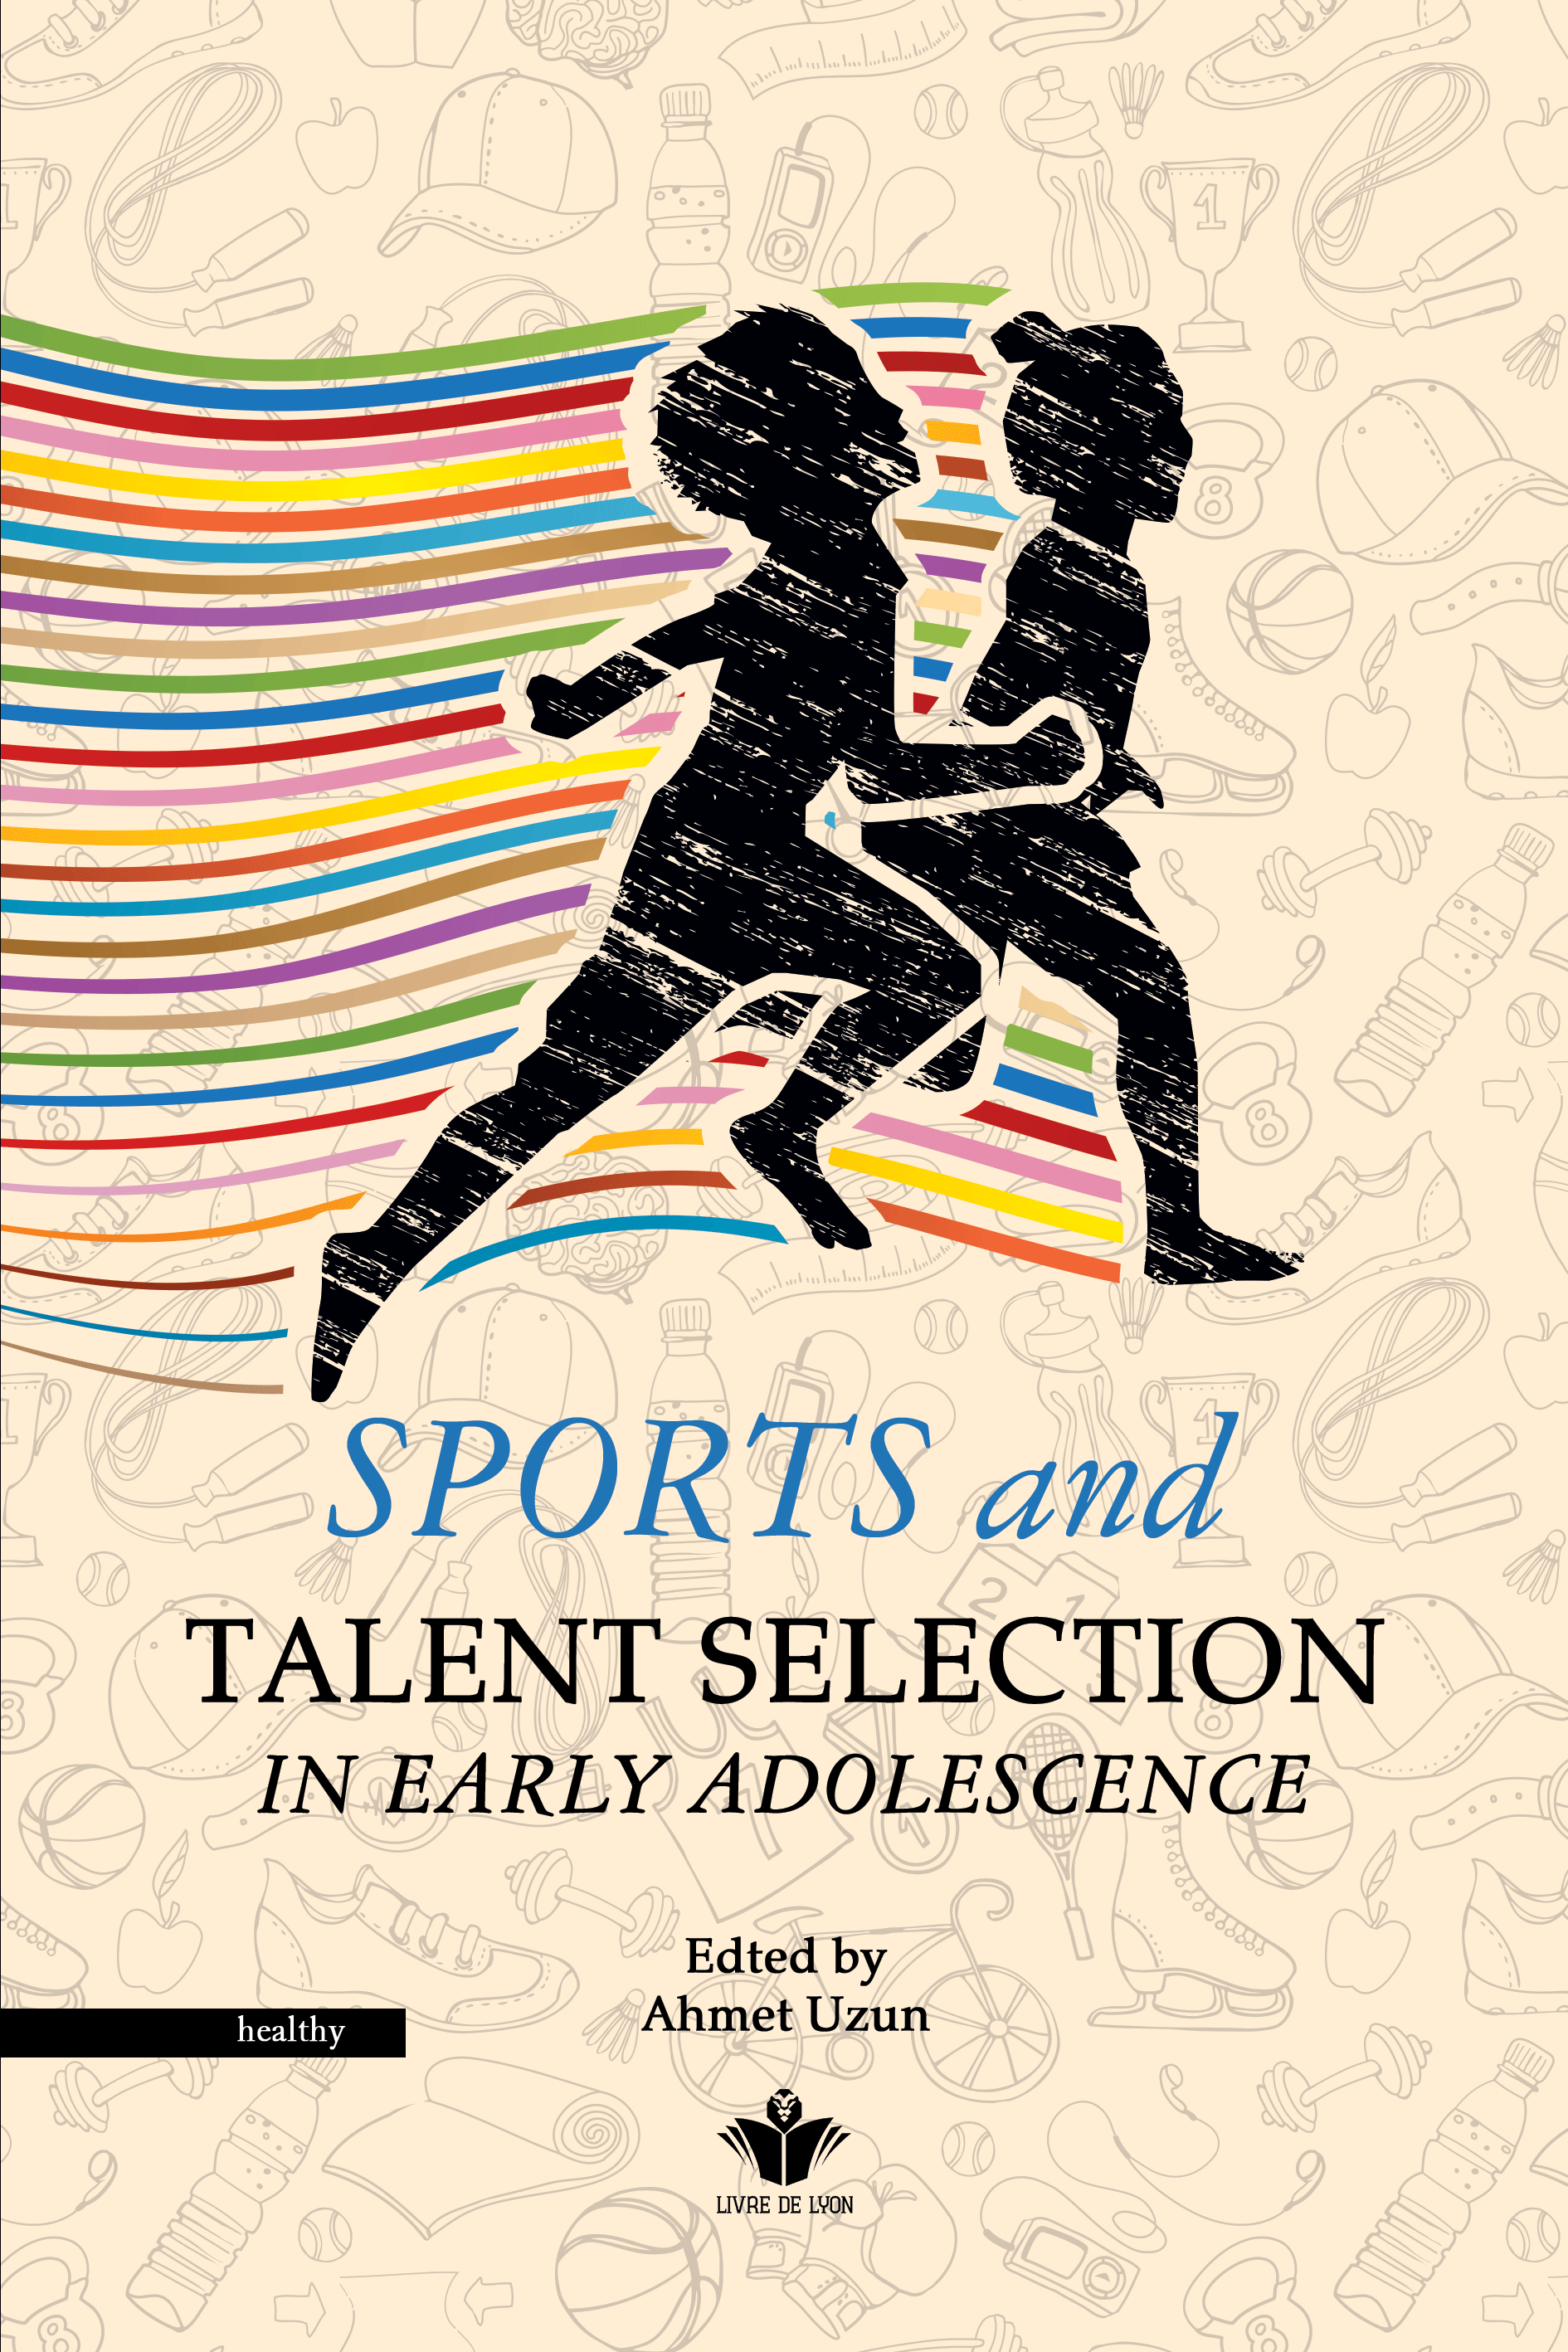 Sports and Talent Selection in Early Adolescence